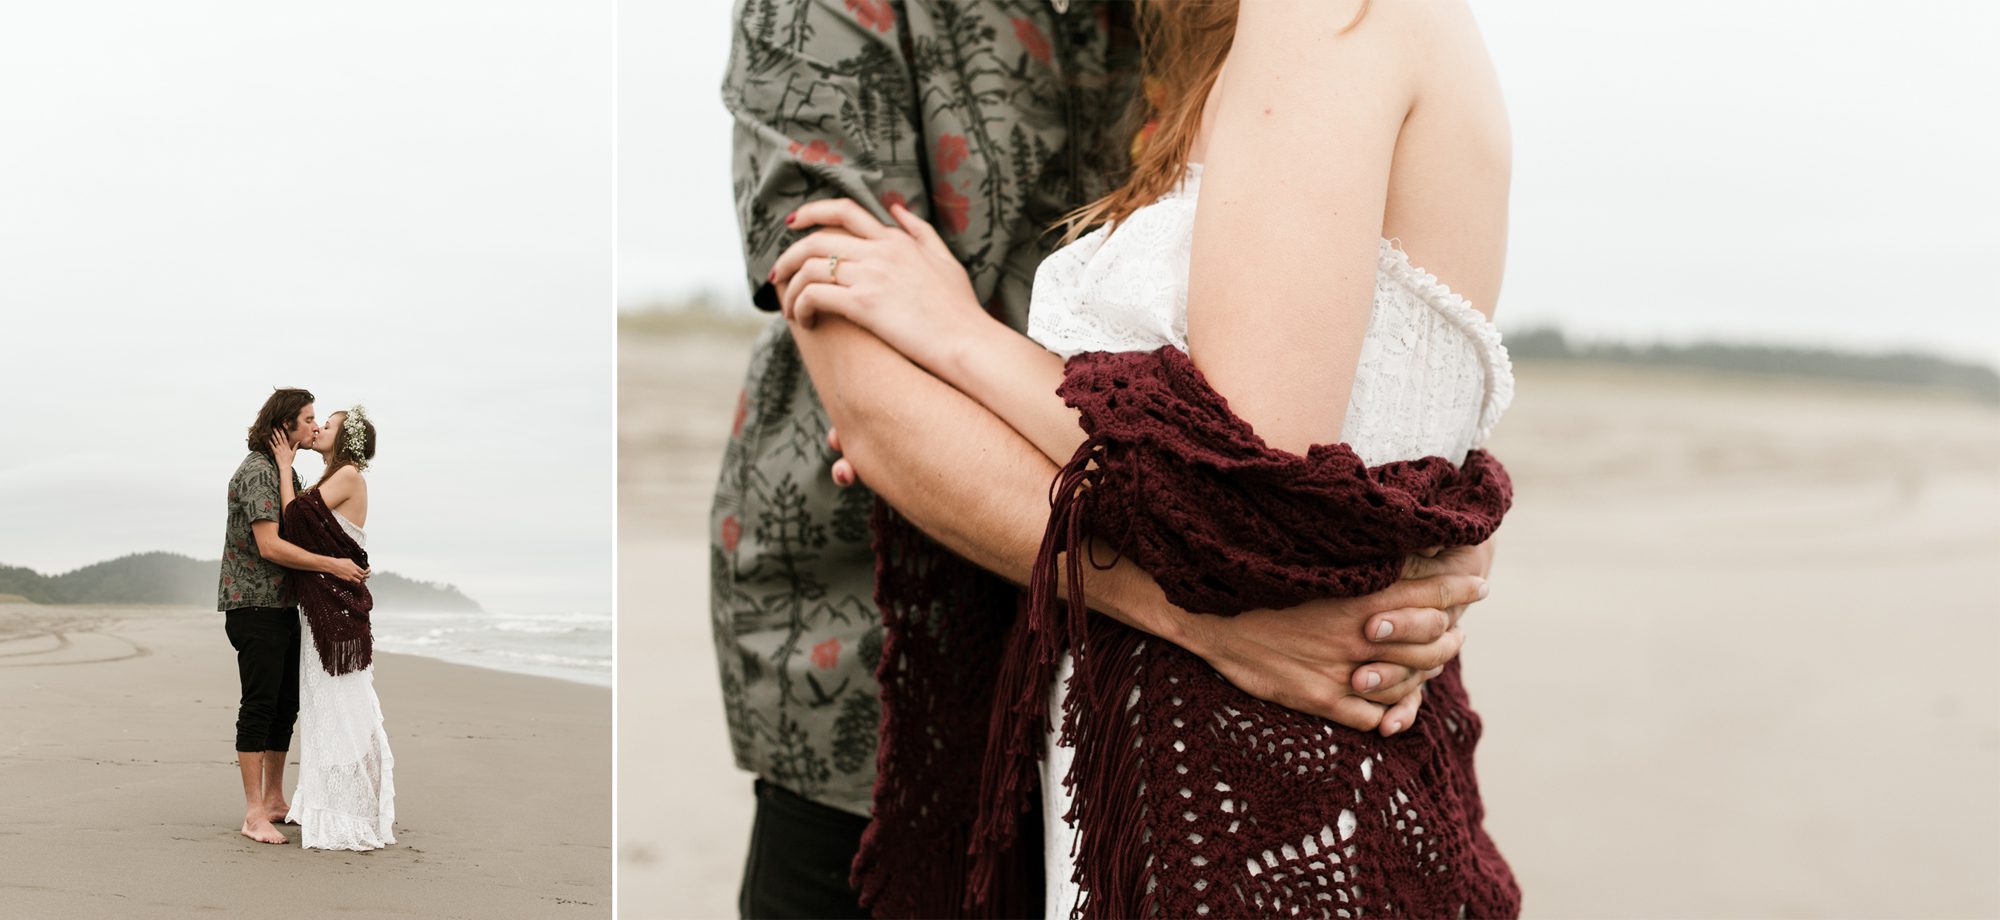 The bride and groom snuggle up to each other on the beach. By Sou'Wester wedding photographer Briana Morrison